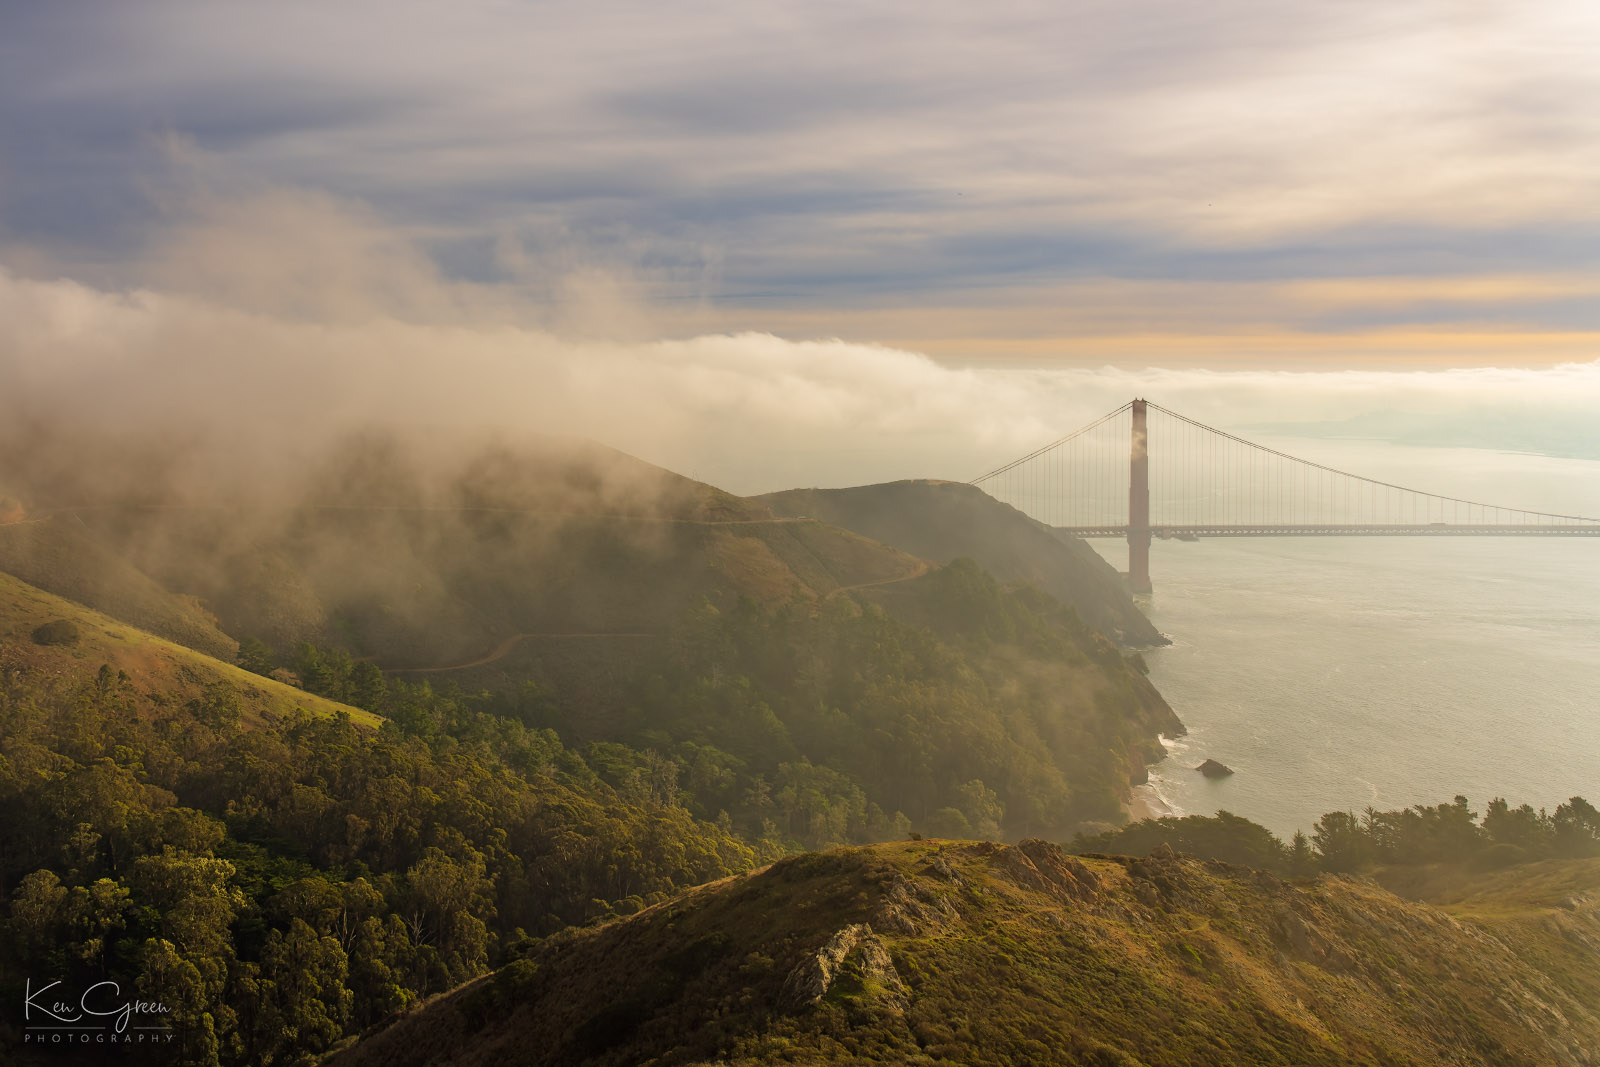 The Golden Gate Bridge obscured by fog is a common site for commuters heading between Marin County and San Francisco. It is most...